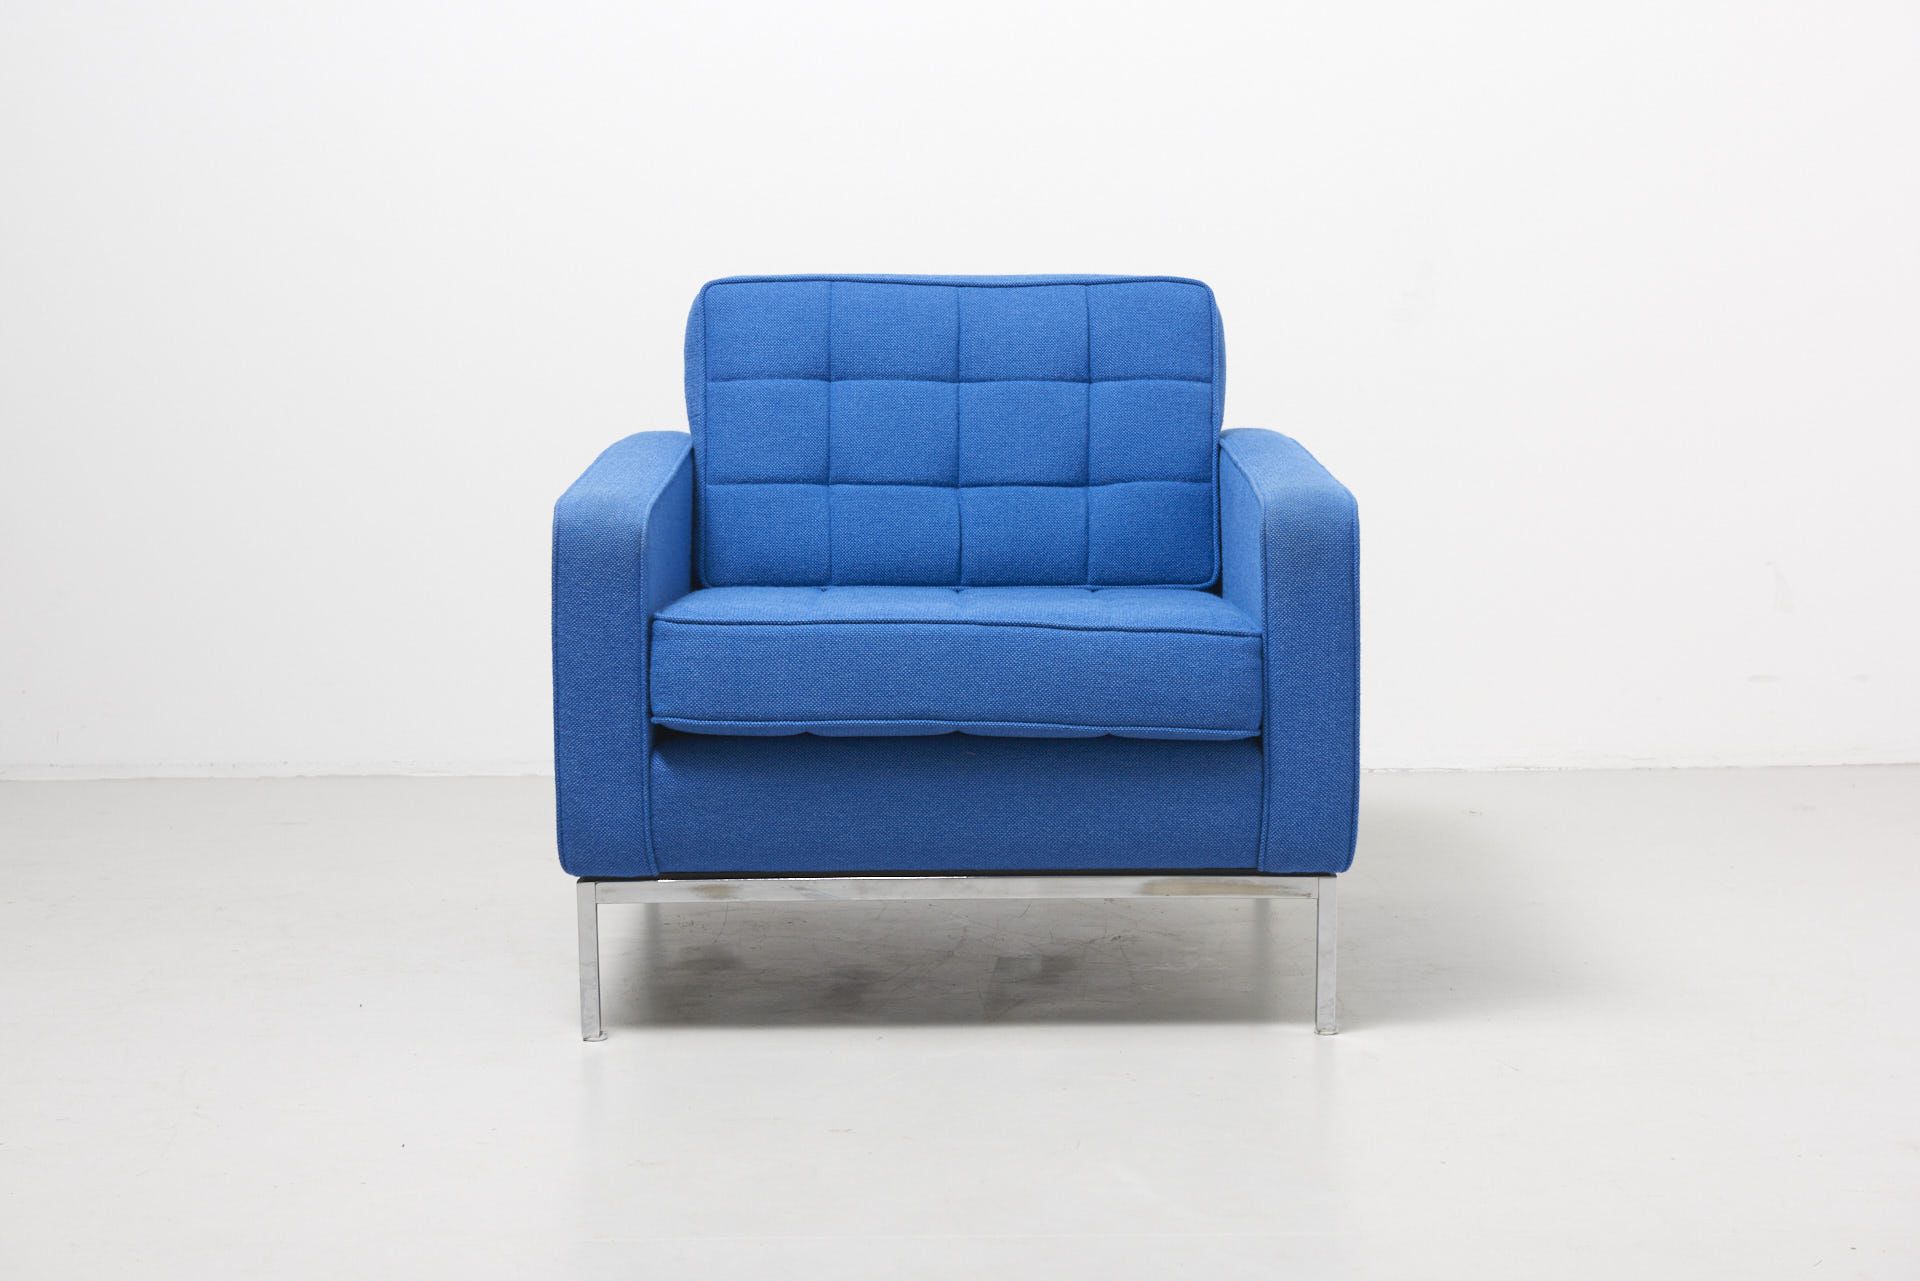 Vintage blue easy chair by Florence Knoll - Design Market